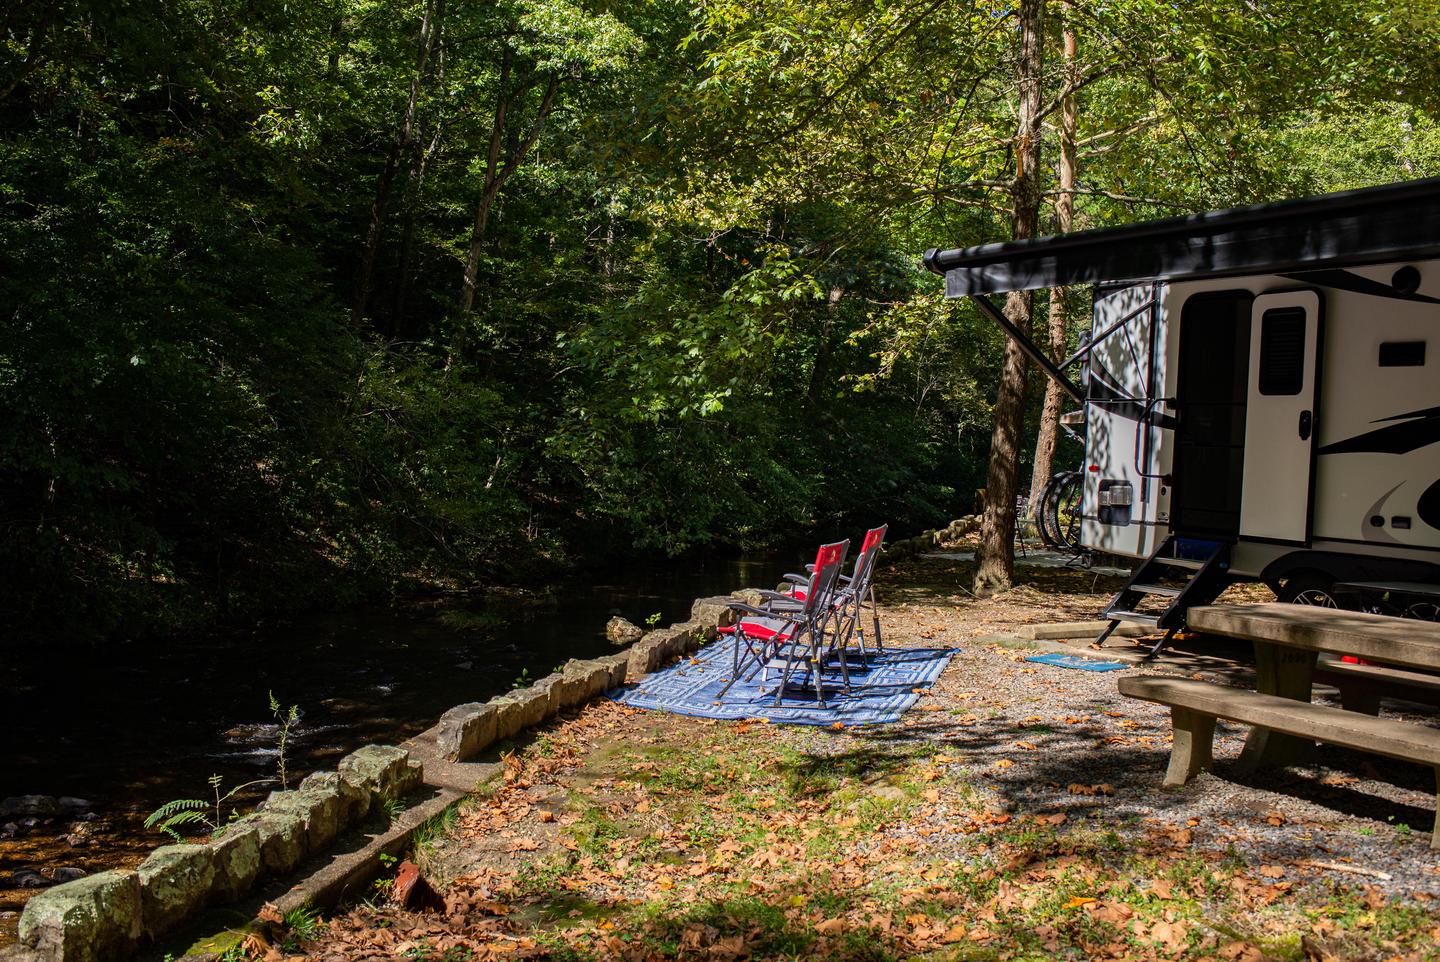 Relax by the CreekMany campsites are located along Gulpha Creek